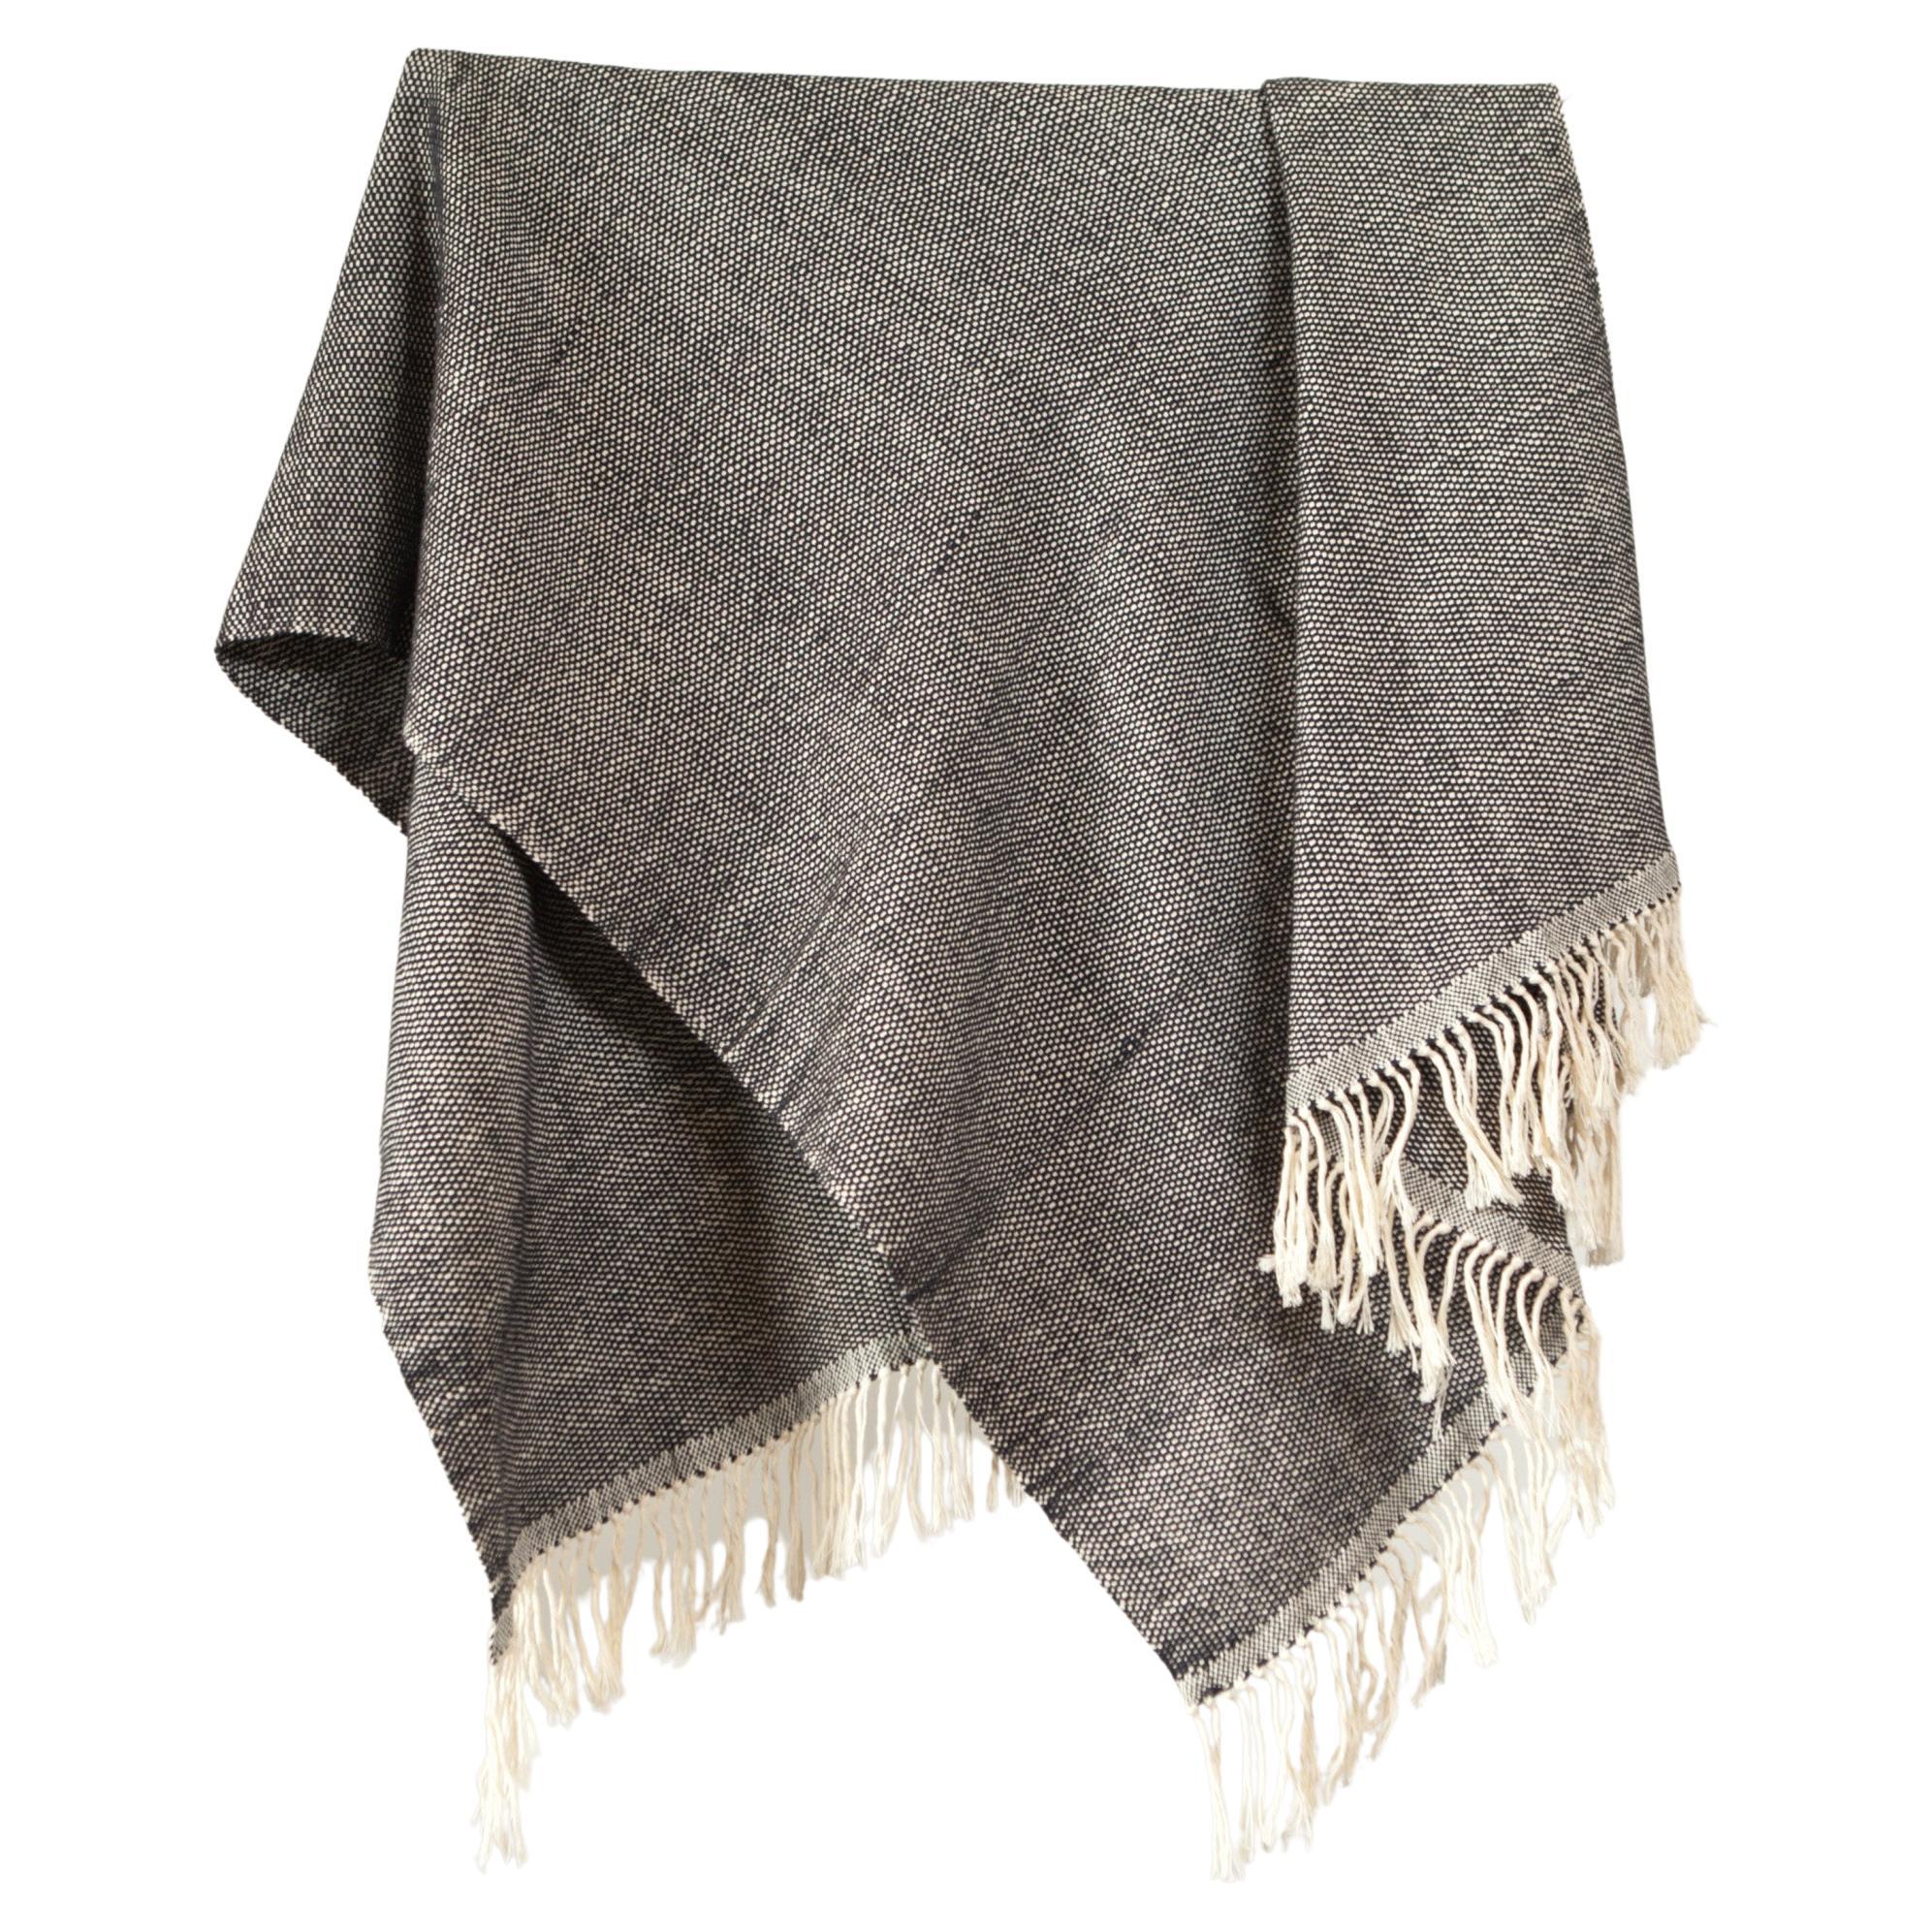 Handwoven Cotton Throw in Natural and Gray with Herringbone Hem, in ...